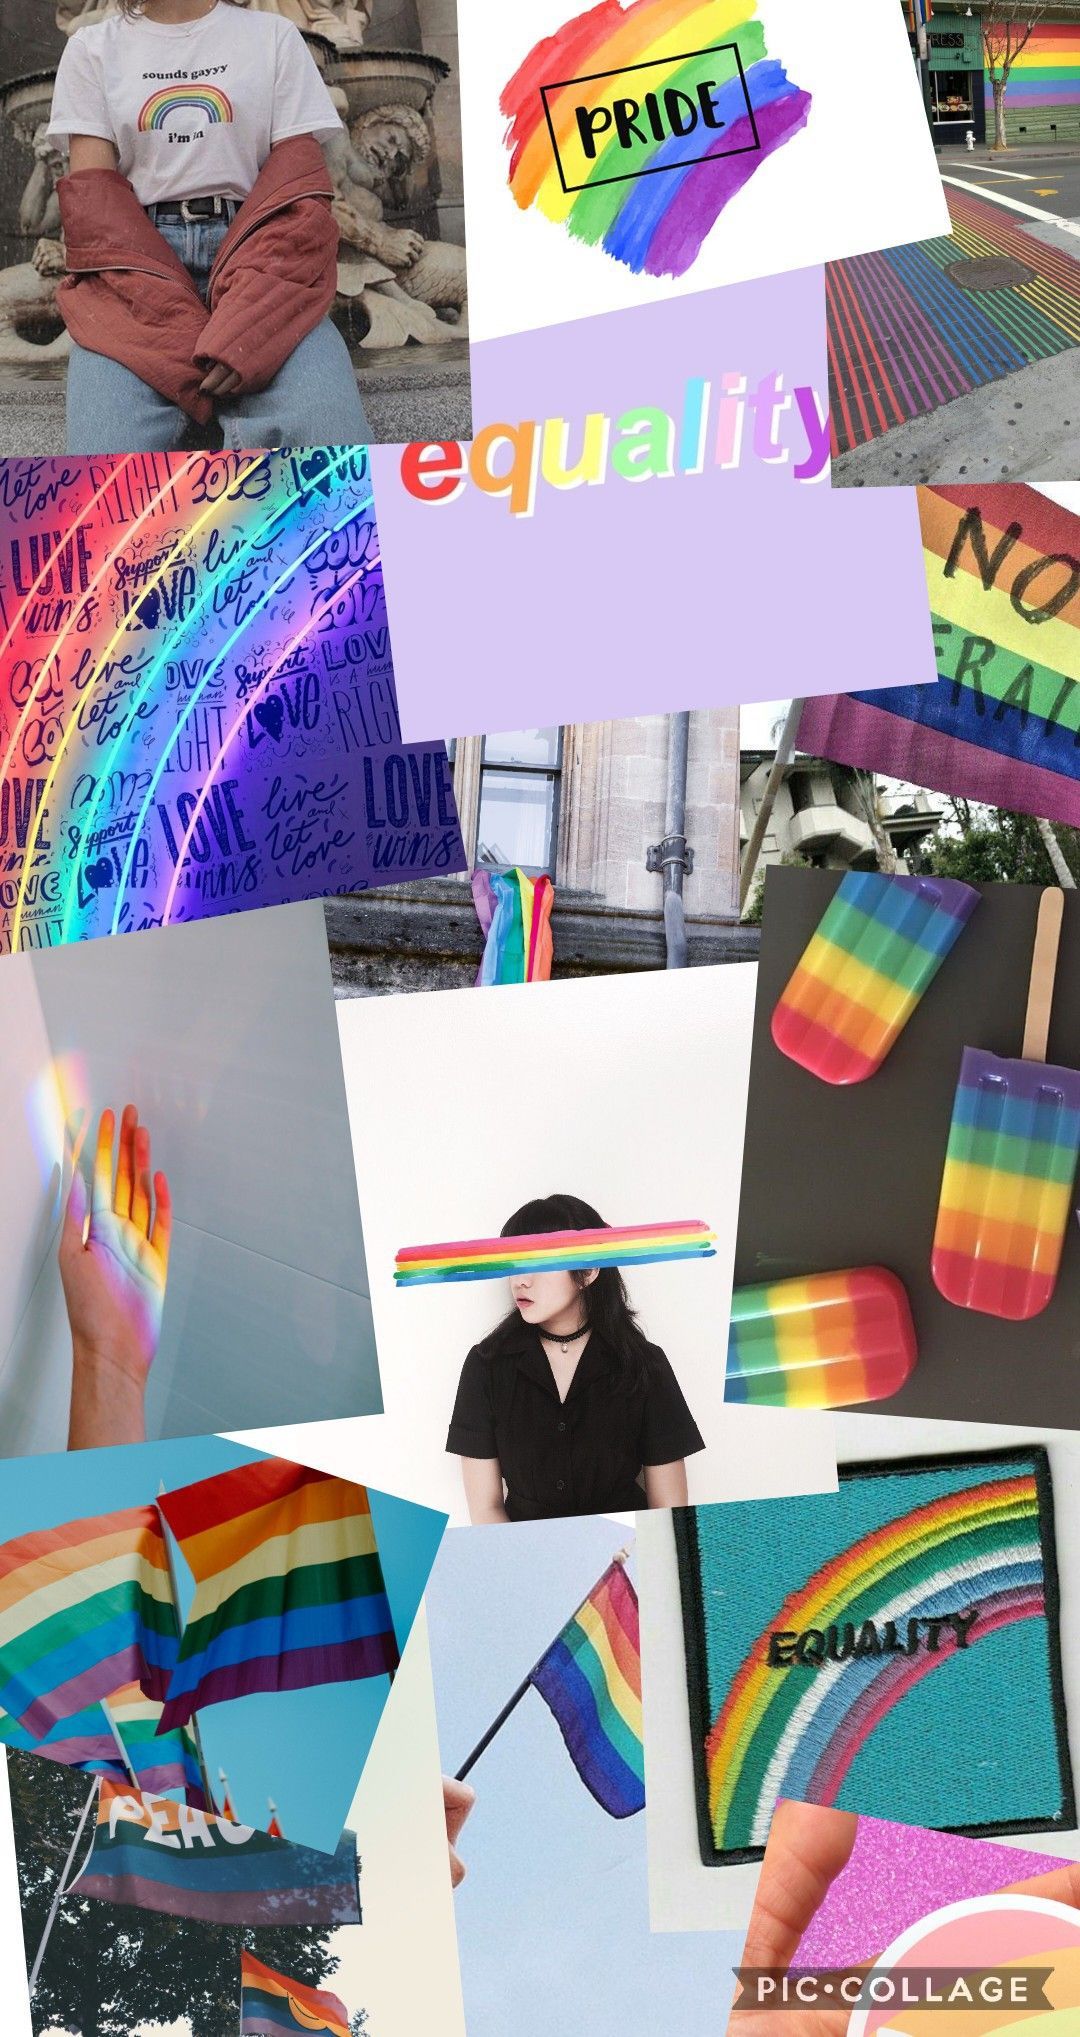 This is a collage of images related to pride and equality. - Pride, gay